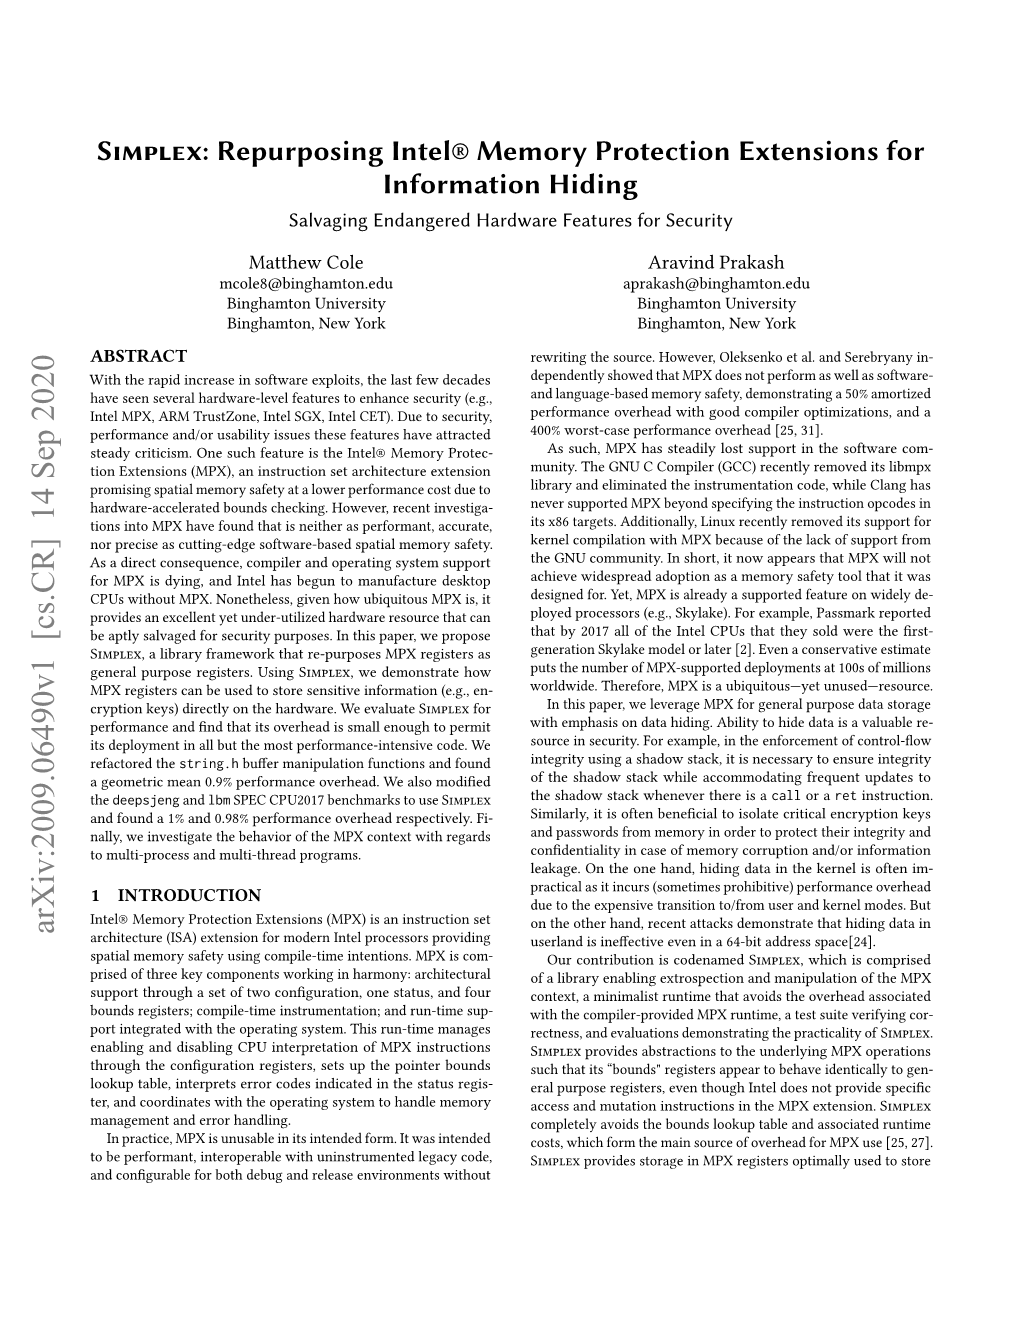 Simplex: Repurposing Intel® Memory Protection Extensions for Information Hiding Salvaging Endangered Hardware Features for Security